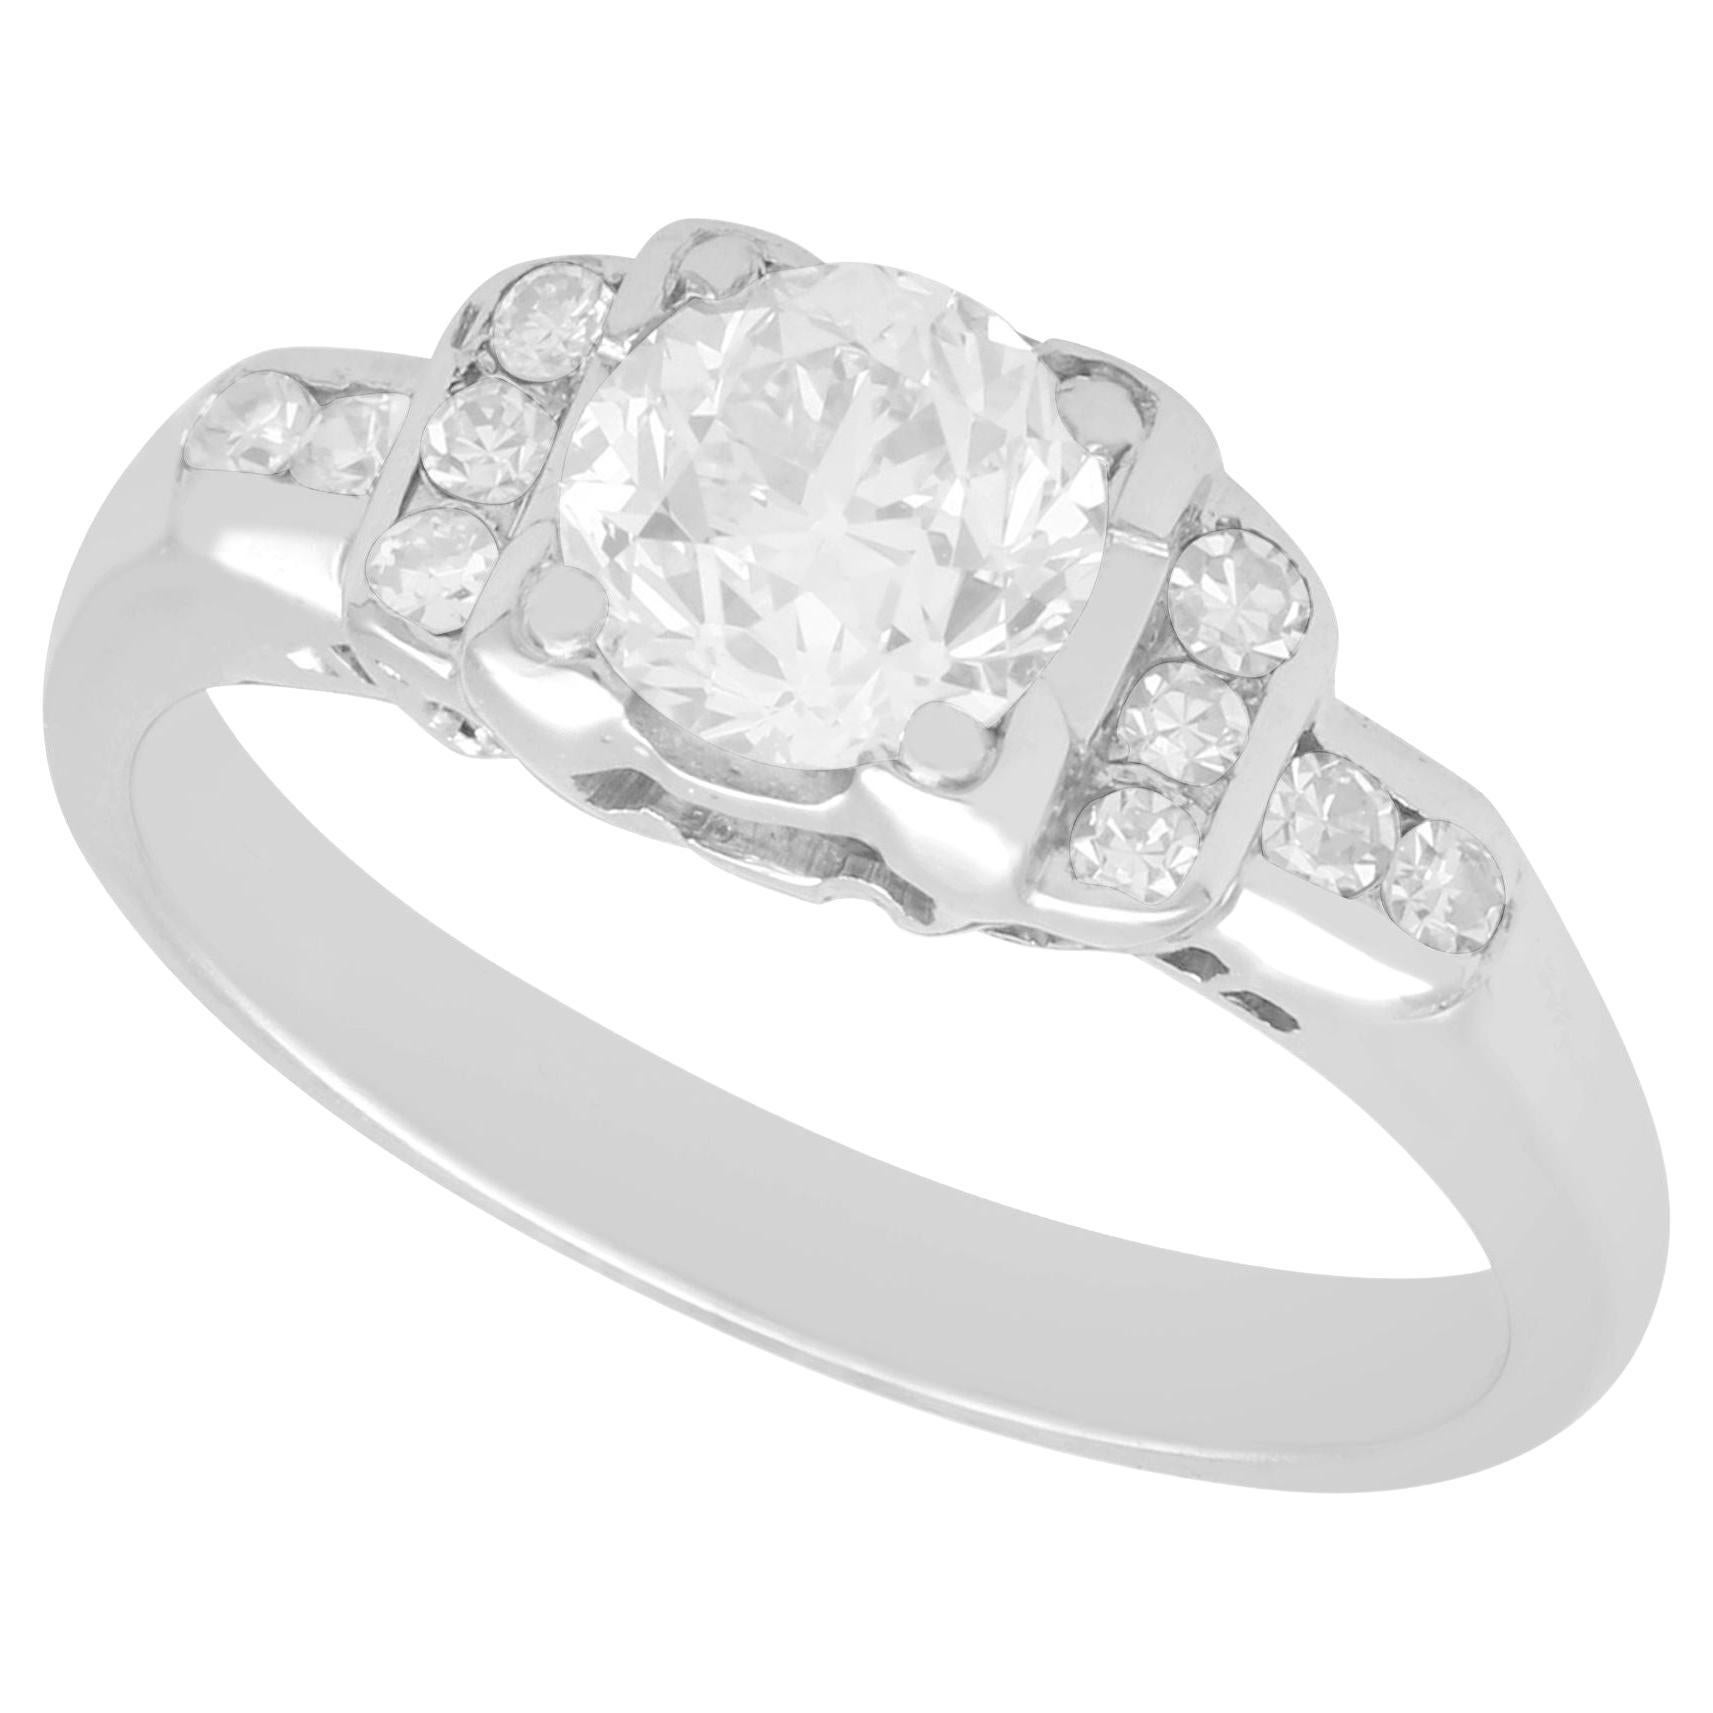 Antique 1.05 Carat Diamond and 14K White Gold Solitaire Ring For Sale